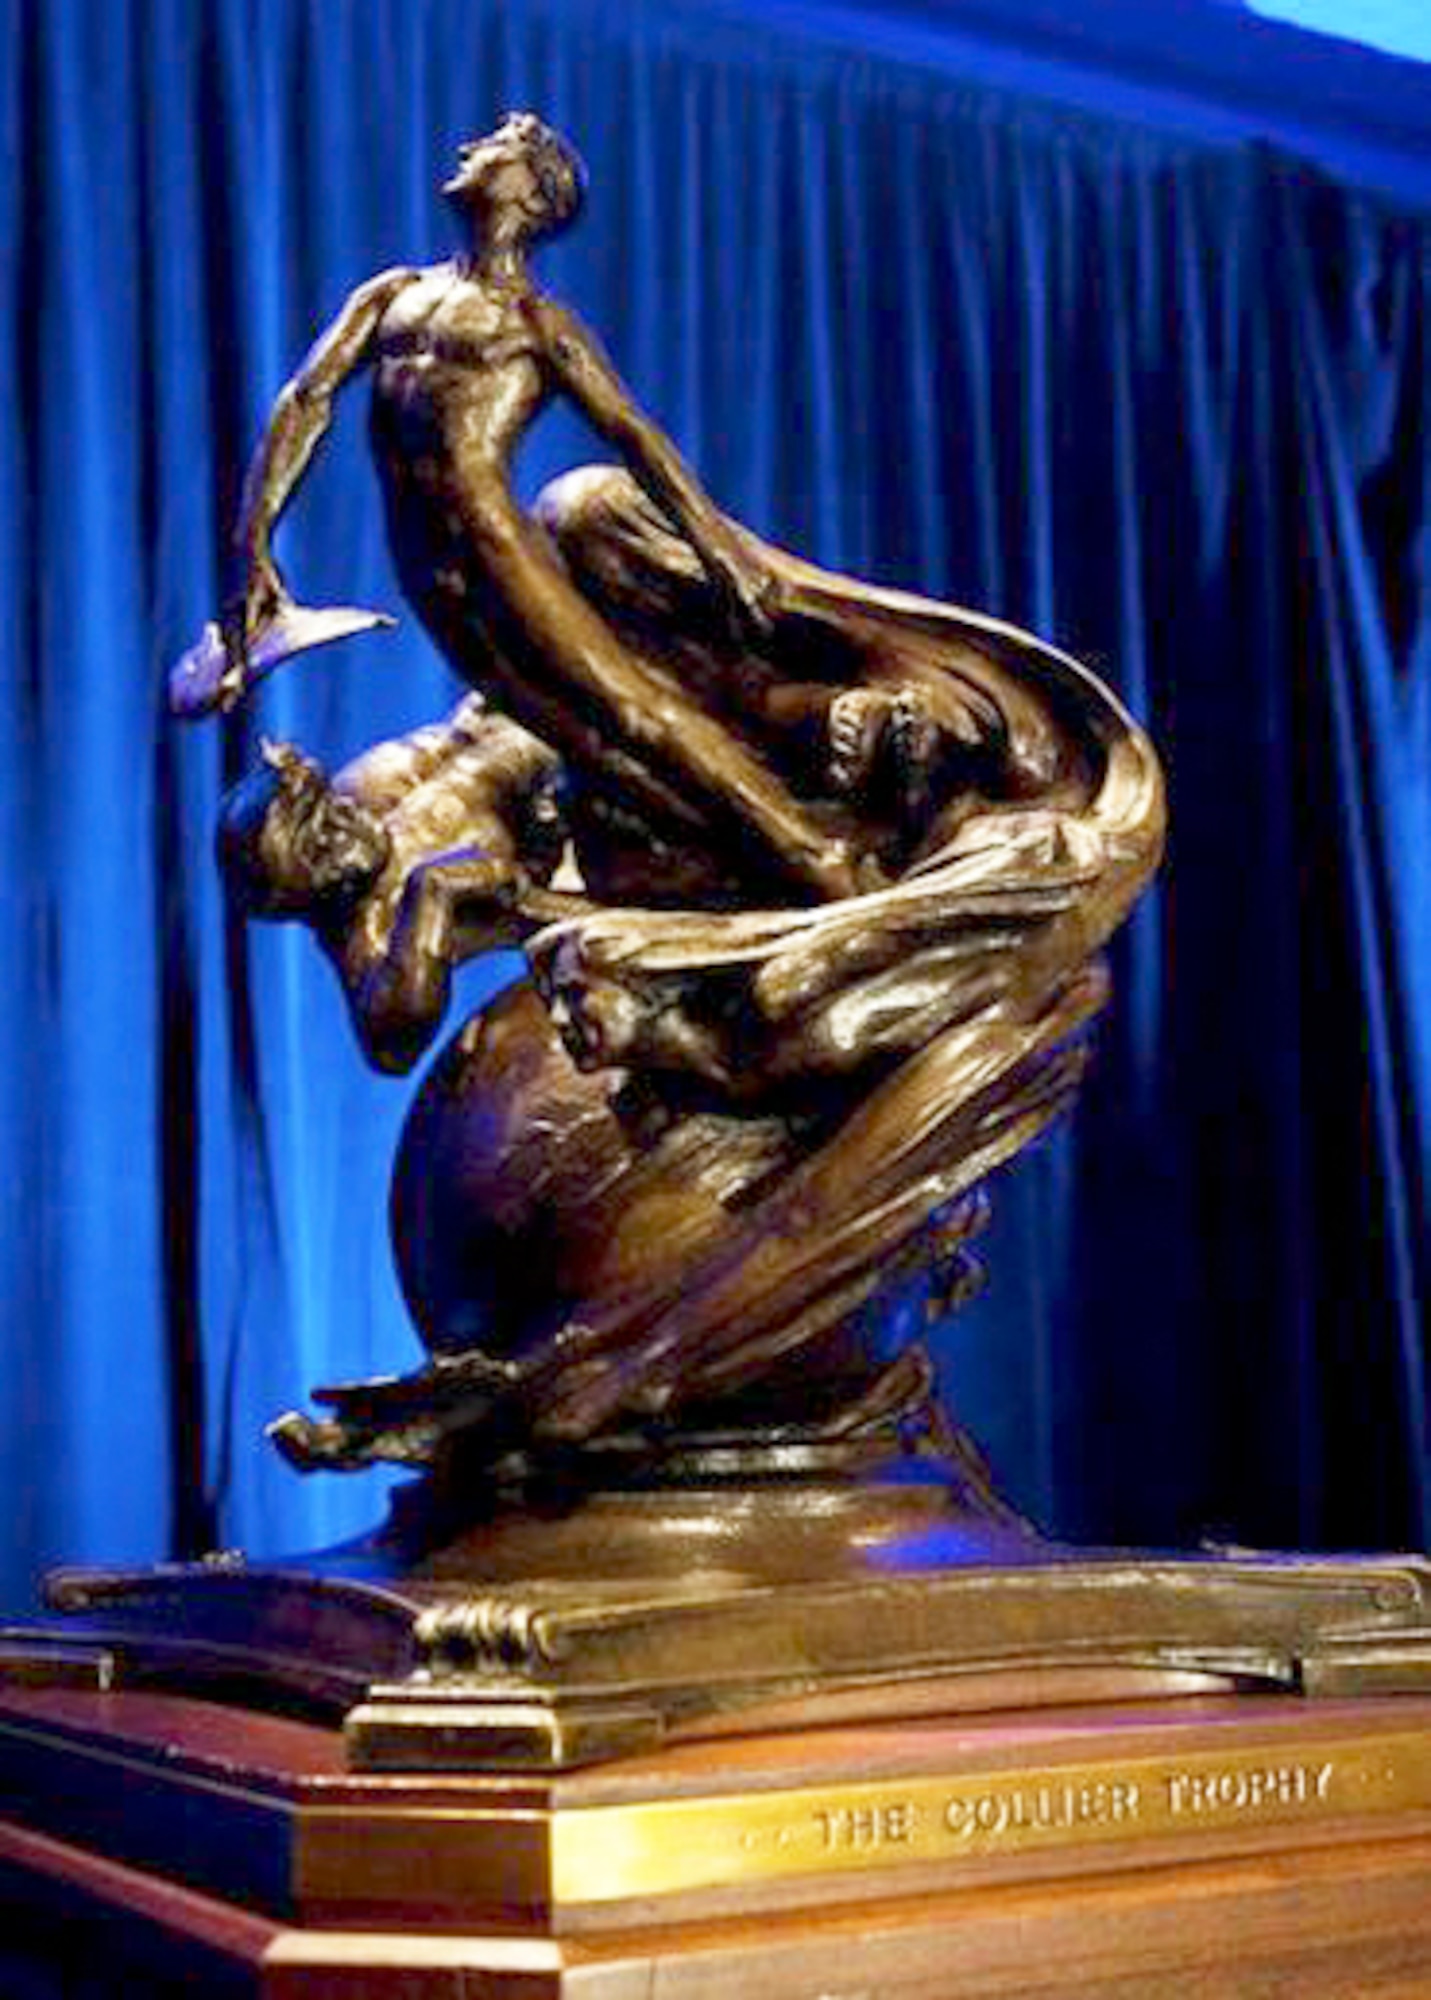 The National Aeronatic Association's Collier Trophy (Courtesy photo from U.S. Naval Air Systems Command)